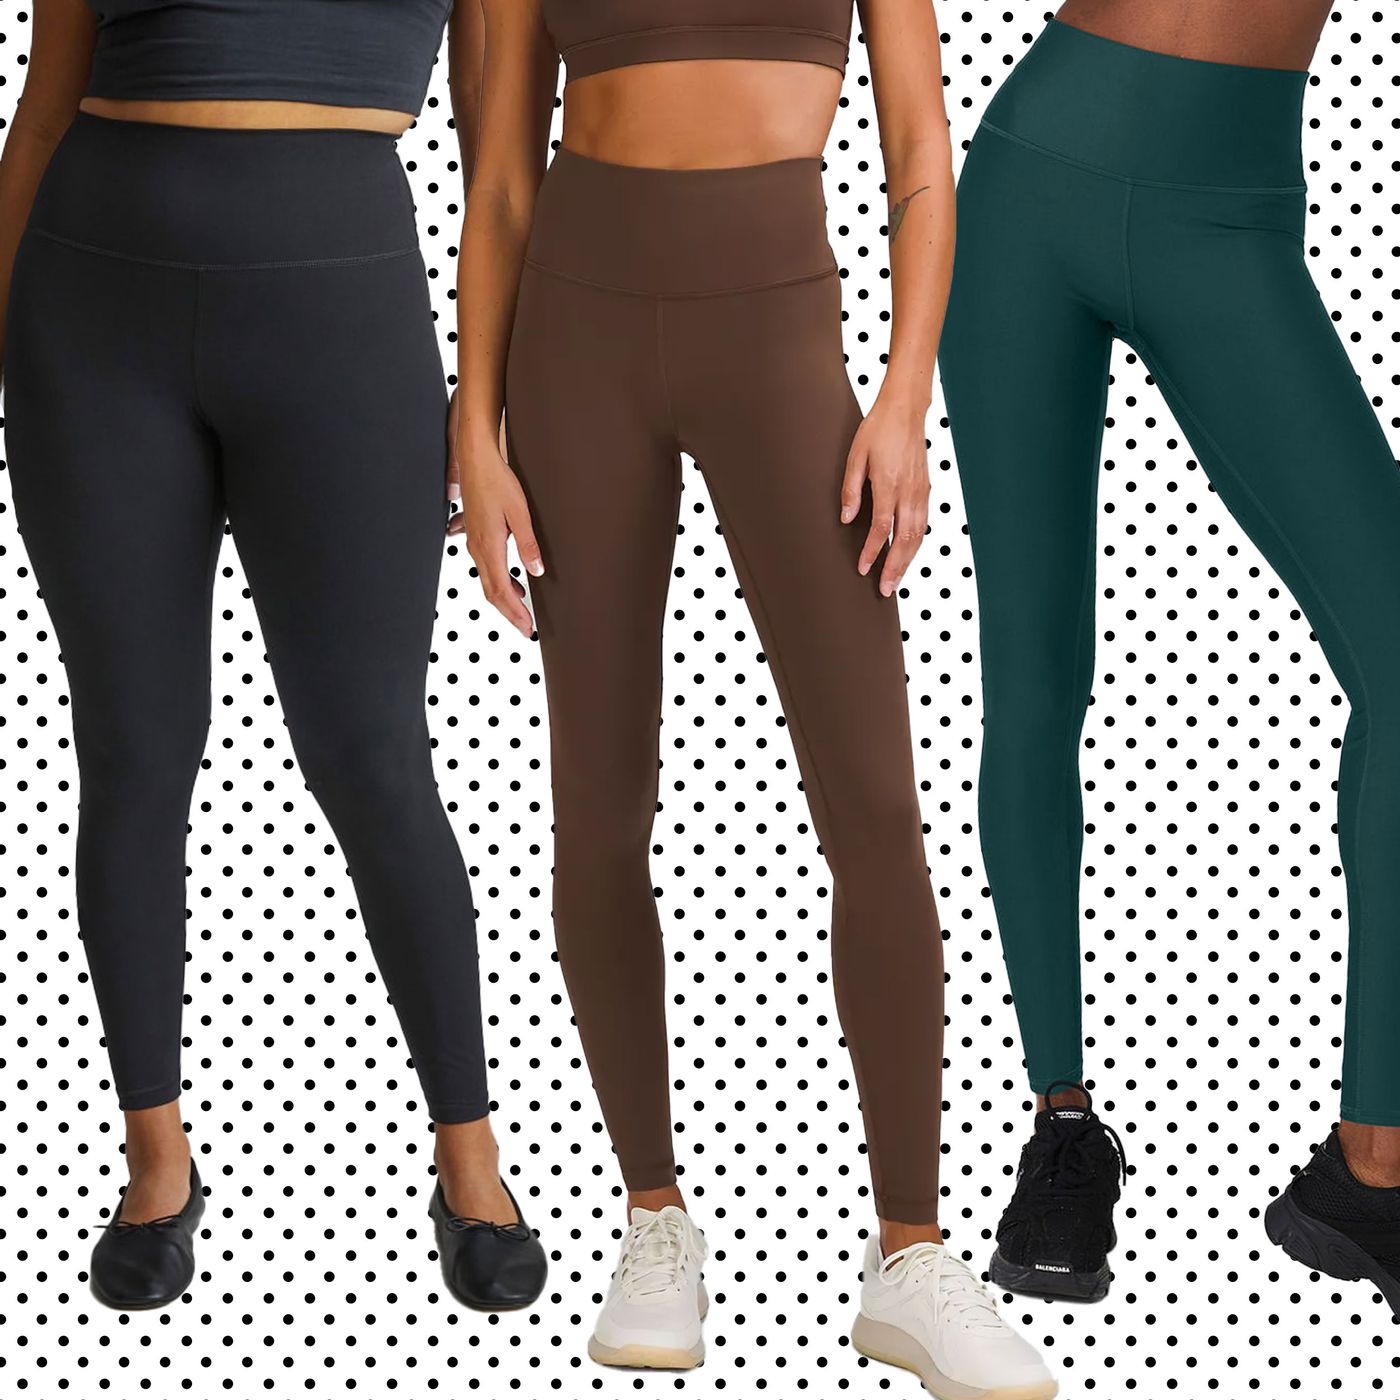 Workout Leggings For Women: Trendy Athletic Wear | Calzedonia-megaelearning.vn